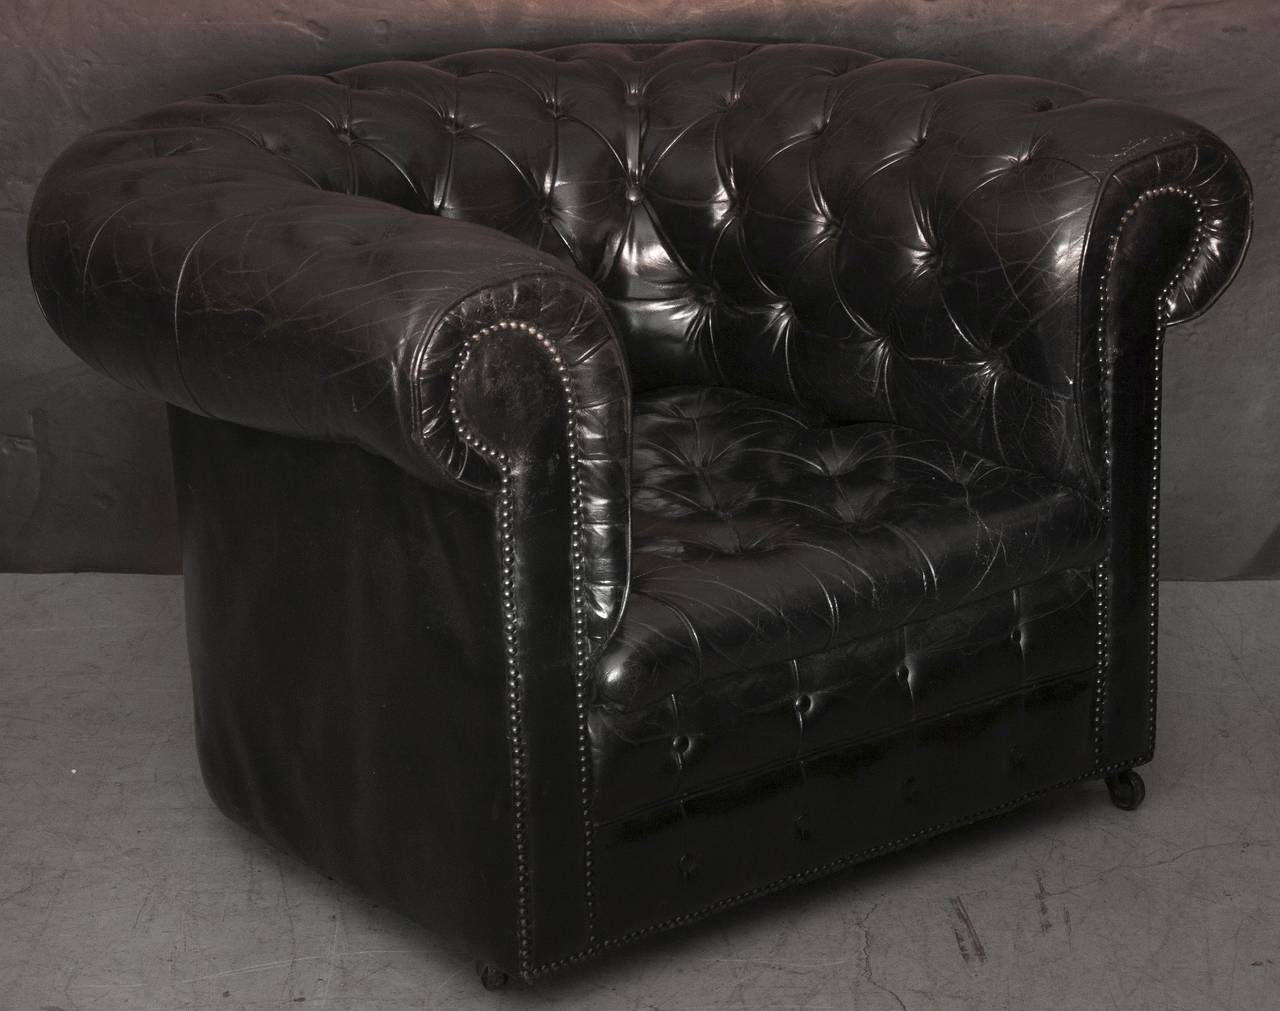 A handsome pair of English Chesterfield club chairs in black or ebony leather. Each chair featuring tufted leather back and seat, rolled arms with brass nail heads trim and rolling casters. With deep seats for comfort and in excellent condition.